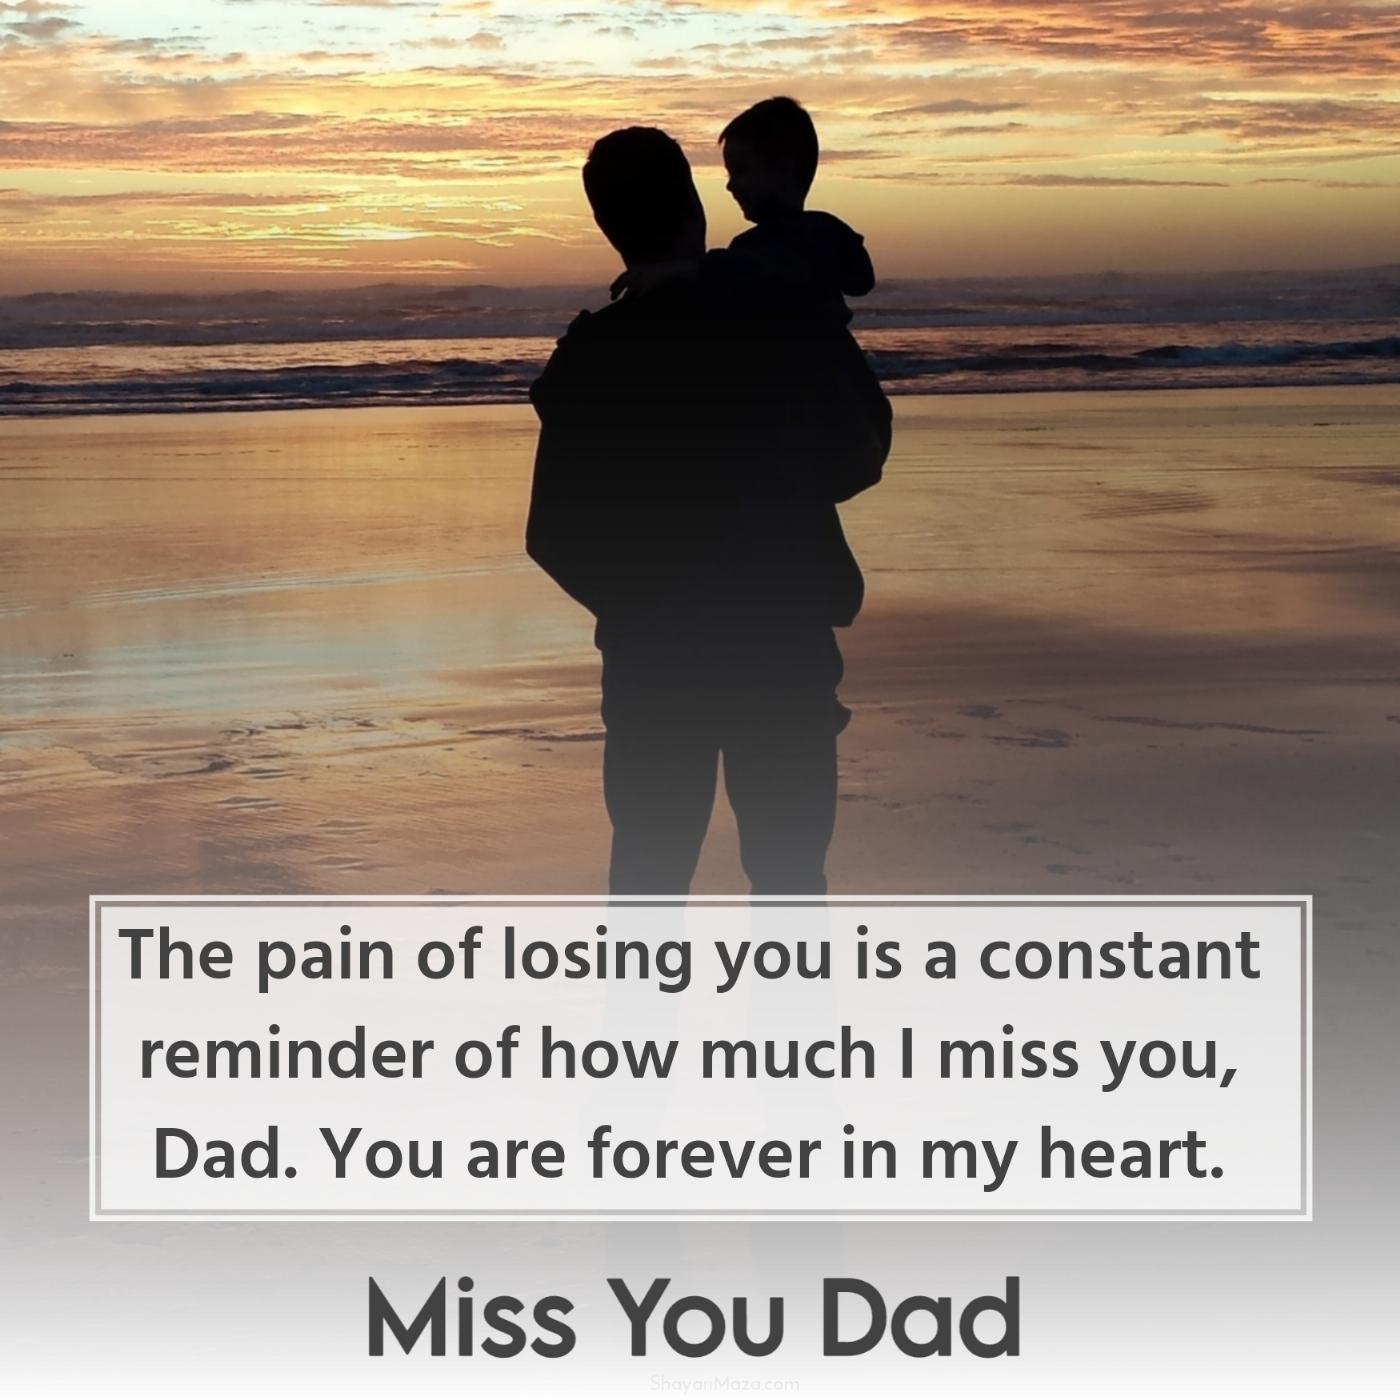 The pain of losing you is a constant reminder of how much I miss you Dad